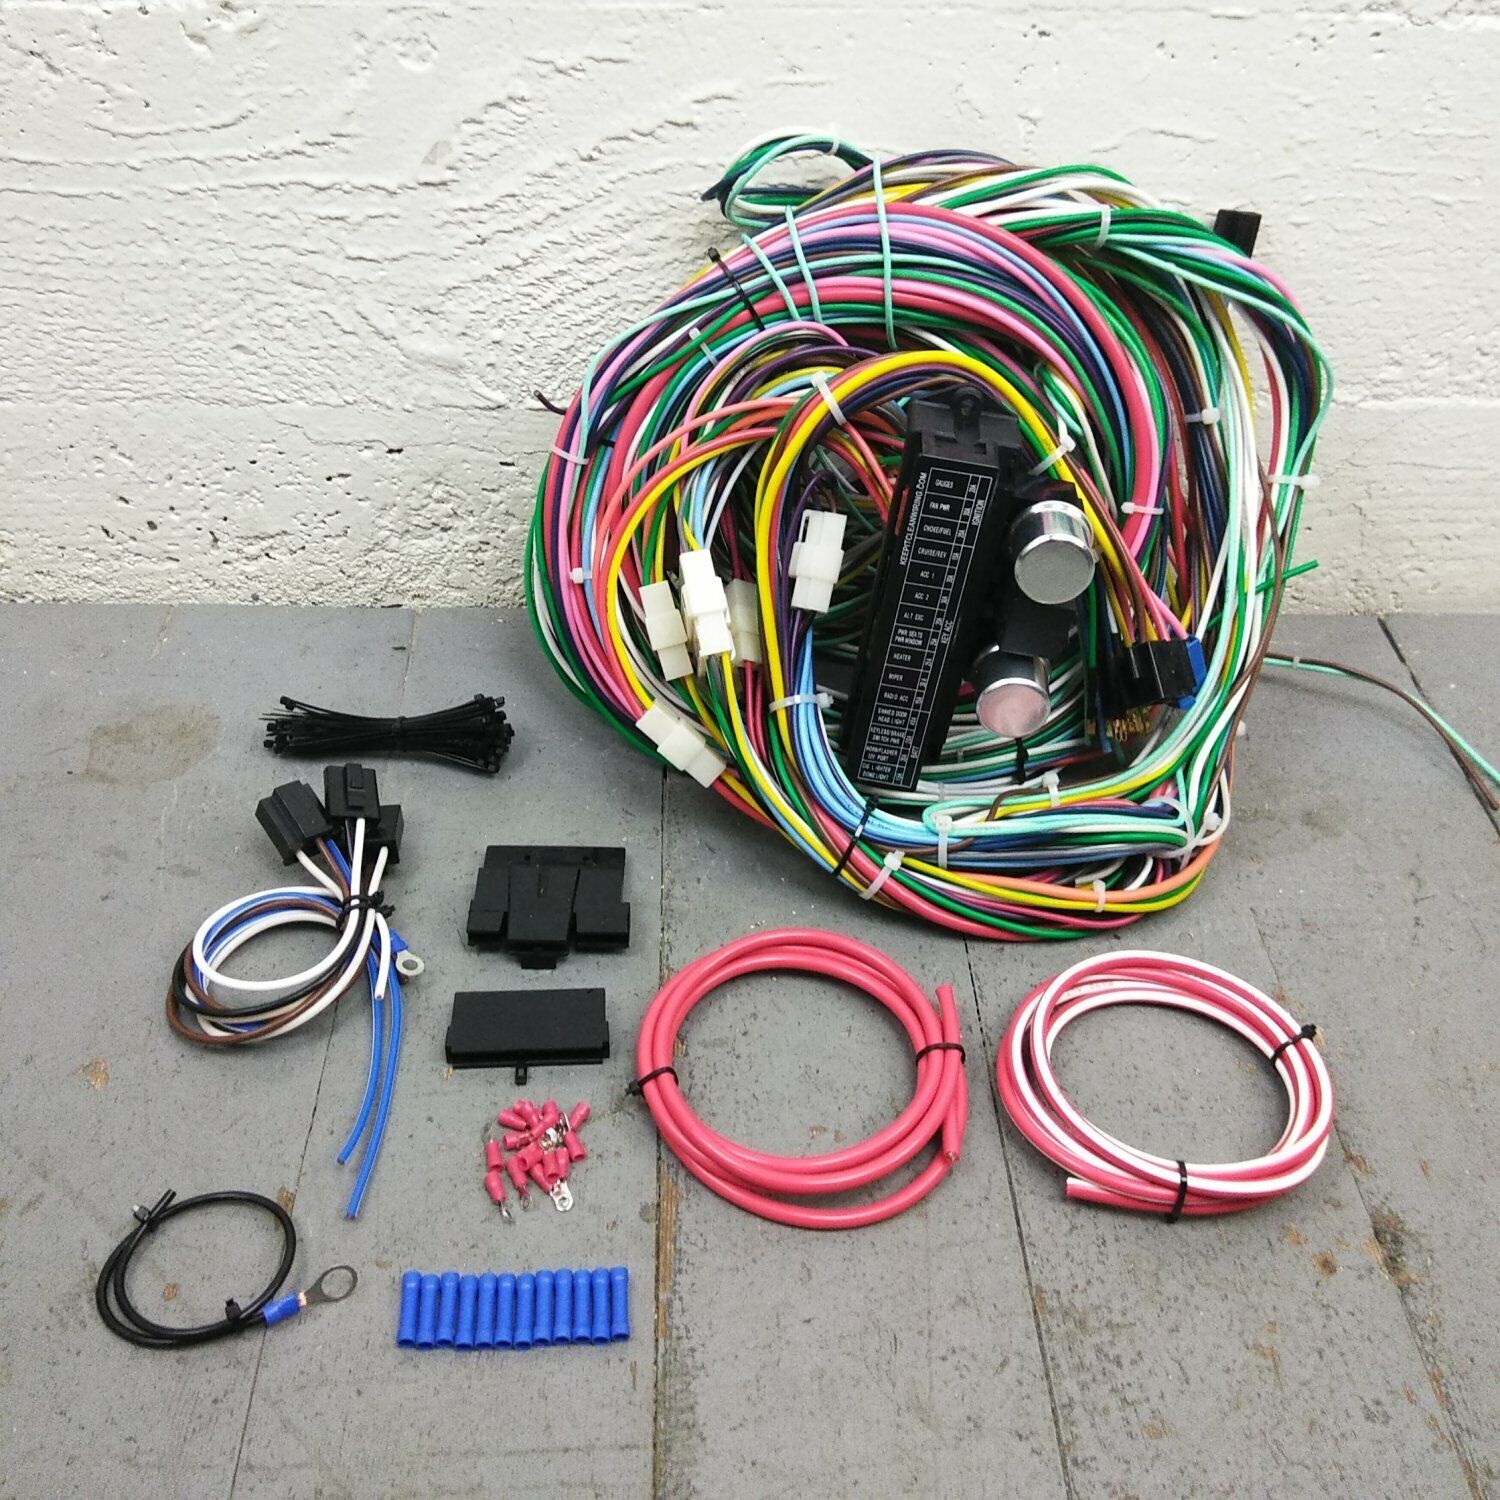 1971 - 1986 JP CJ Wire Harness Upgrade Kit fits painless fuse block terminal